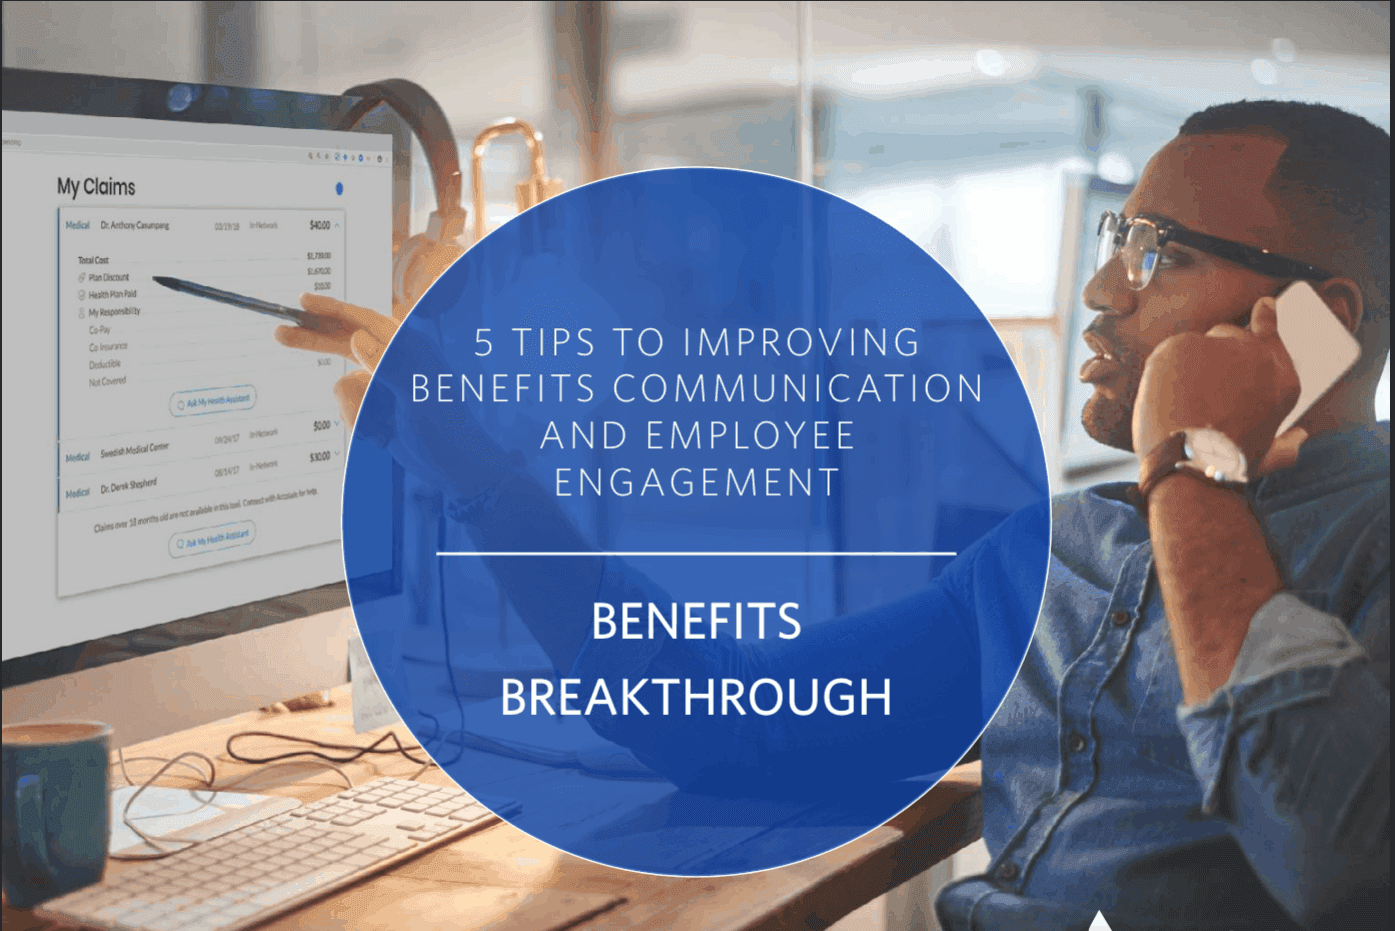 5 Tips to Improving Benefits Communication and Employee Engagement 